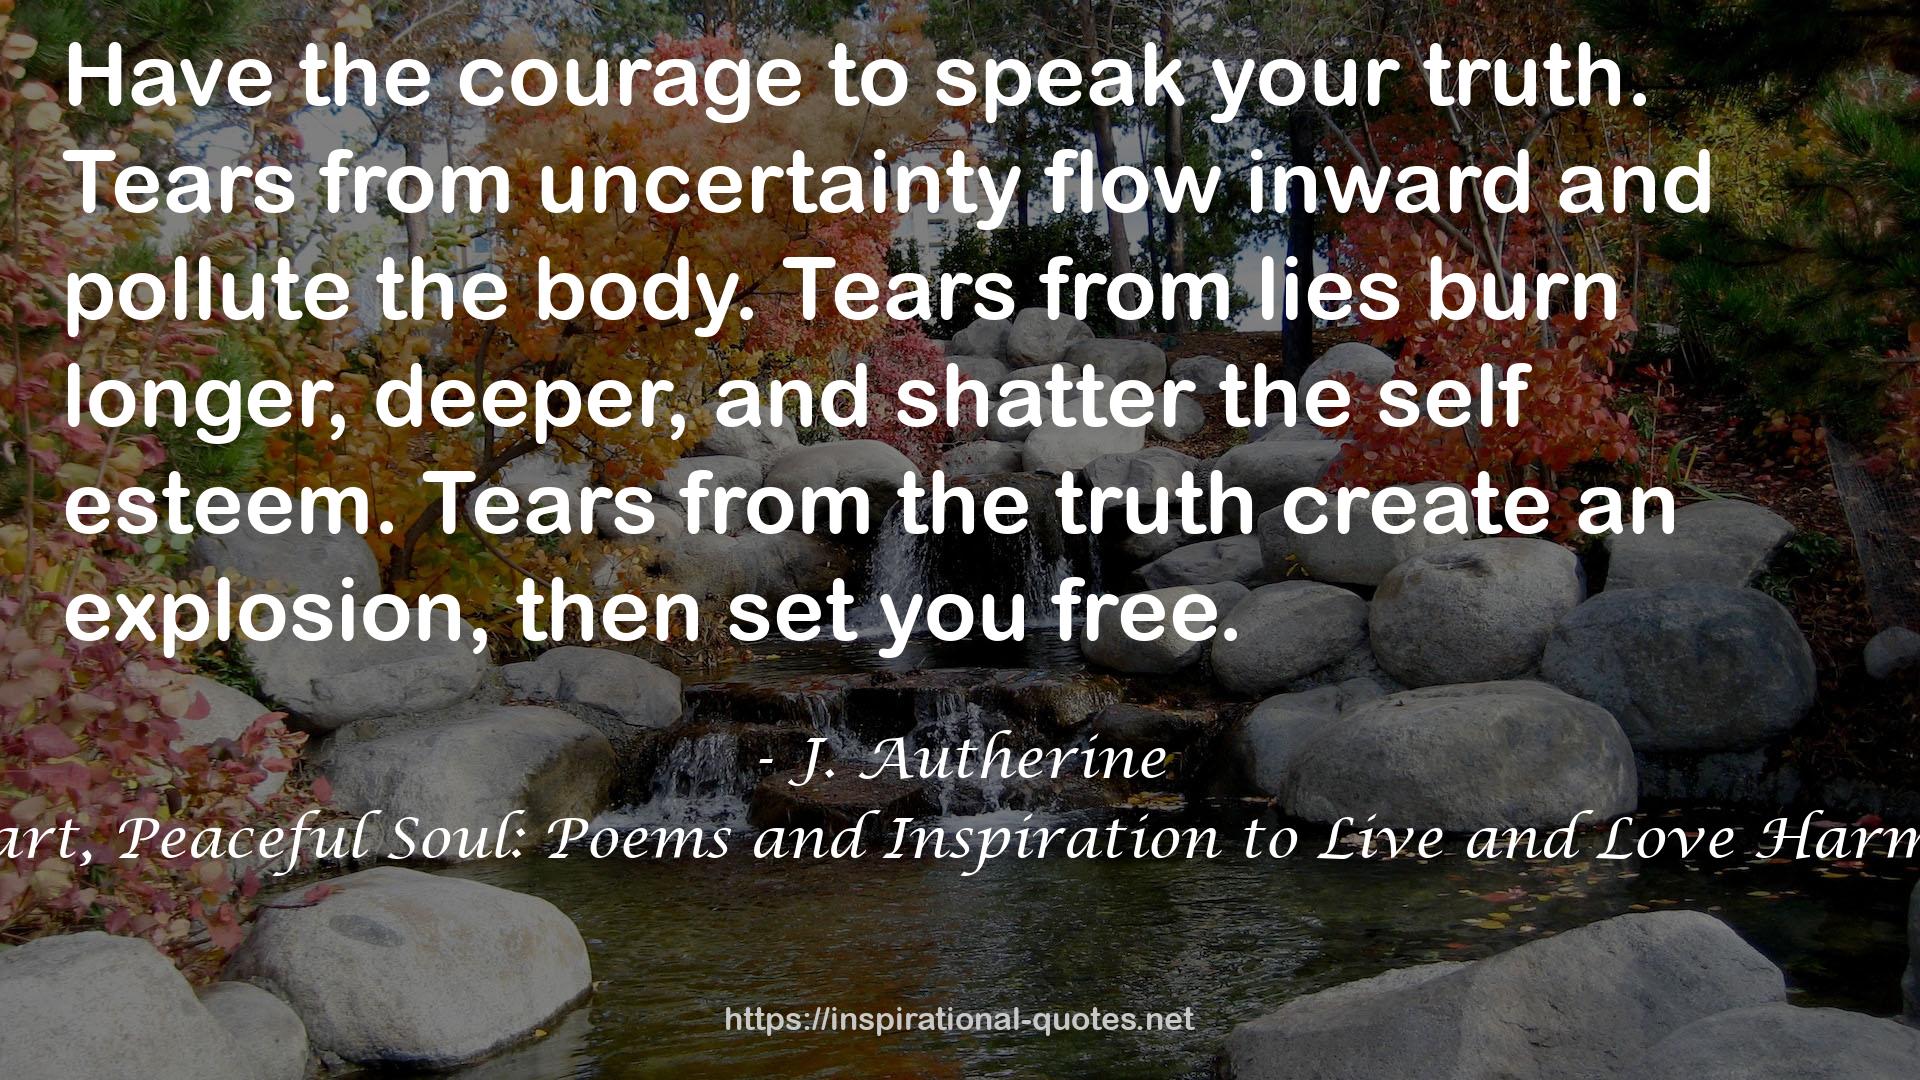 Wild Heart, Peaceful Soul: Poems and Inspiration to Live and Love Harmoniously QUOTES